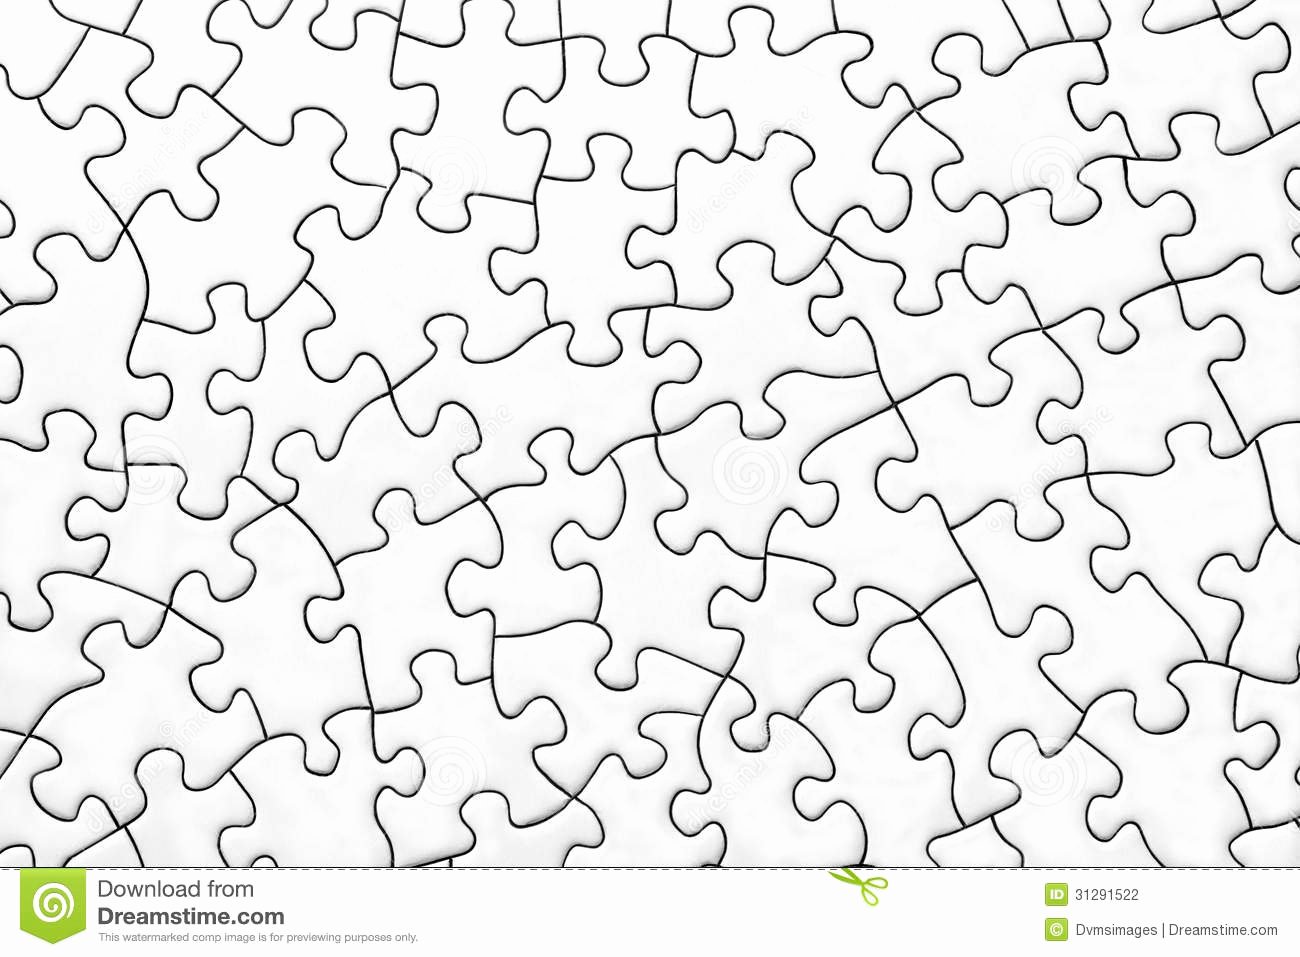 Blank Jigsaw Puzzle Template Unique Blank Jigsaw Stock Graphy Image